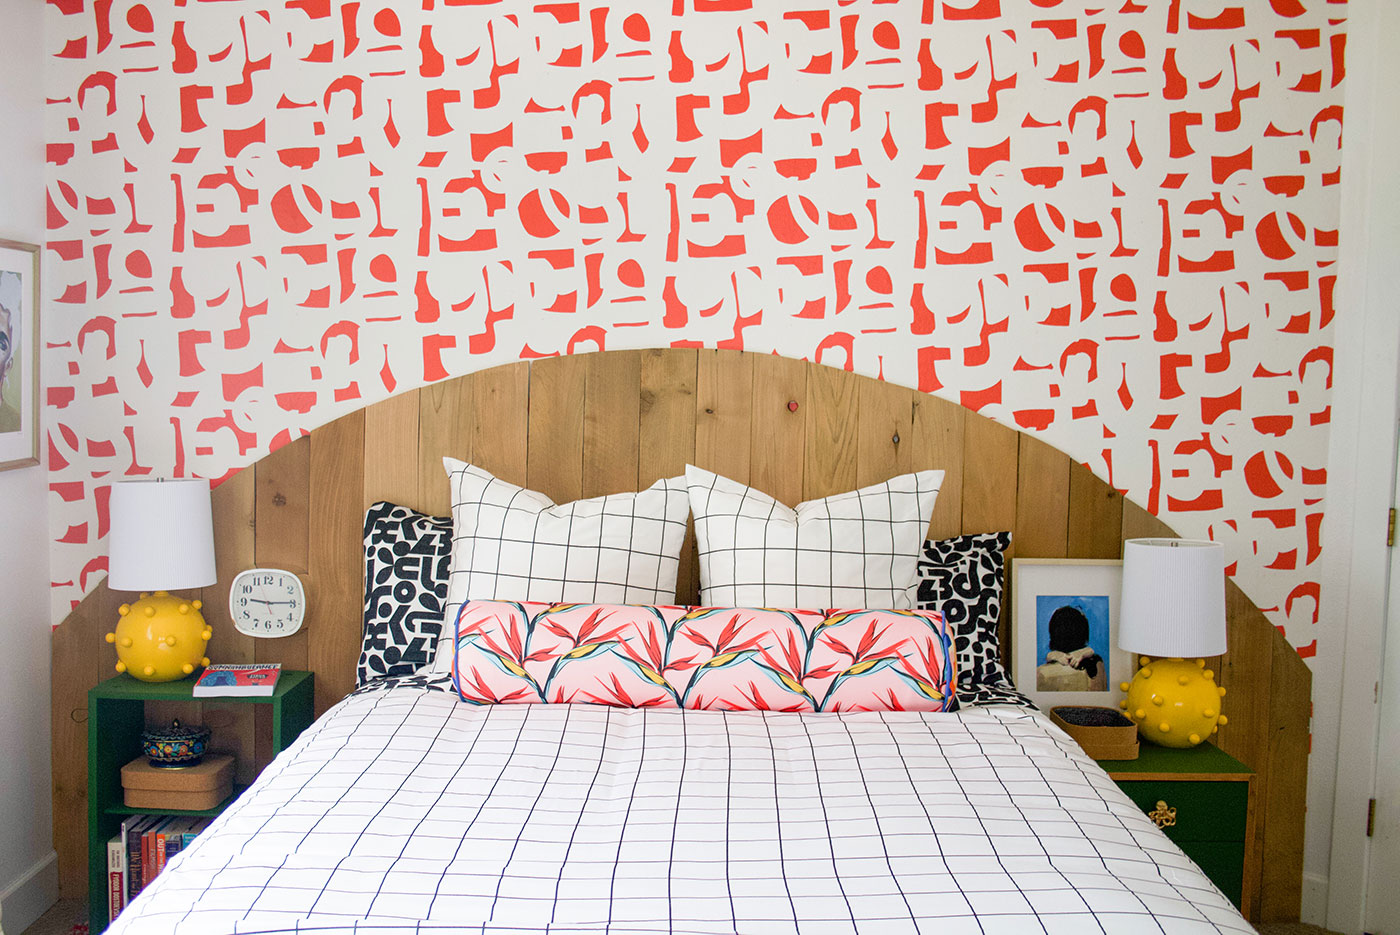 how to mix Mix patterns and colors in a bedroom